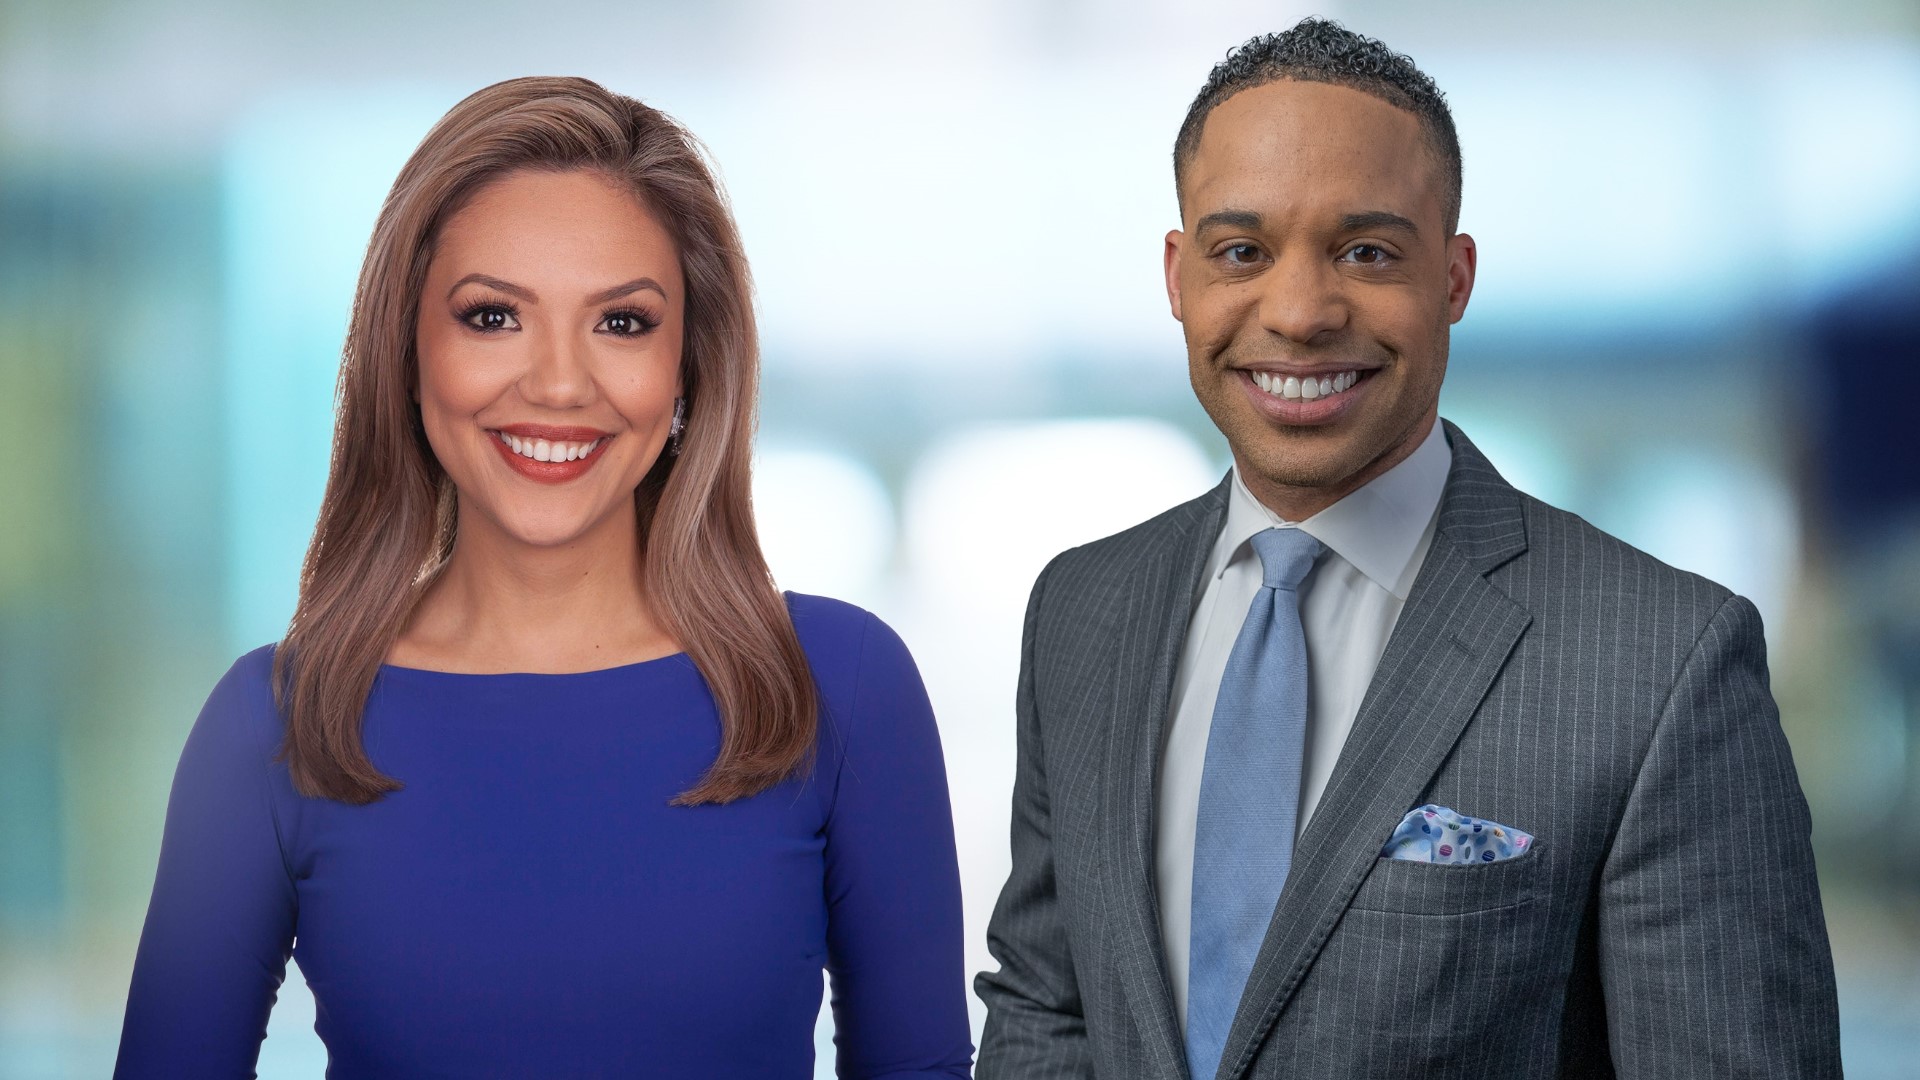 WCNC Charlotte News Team gives you updates on the latest local, regional and national news events of the day, as well as updates on sports, weather and traffic.